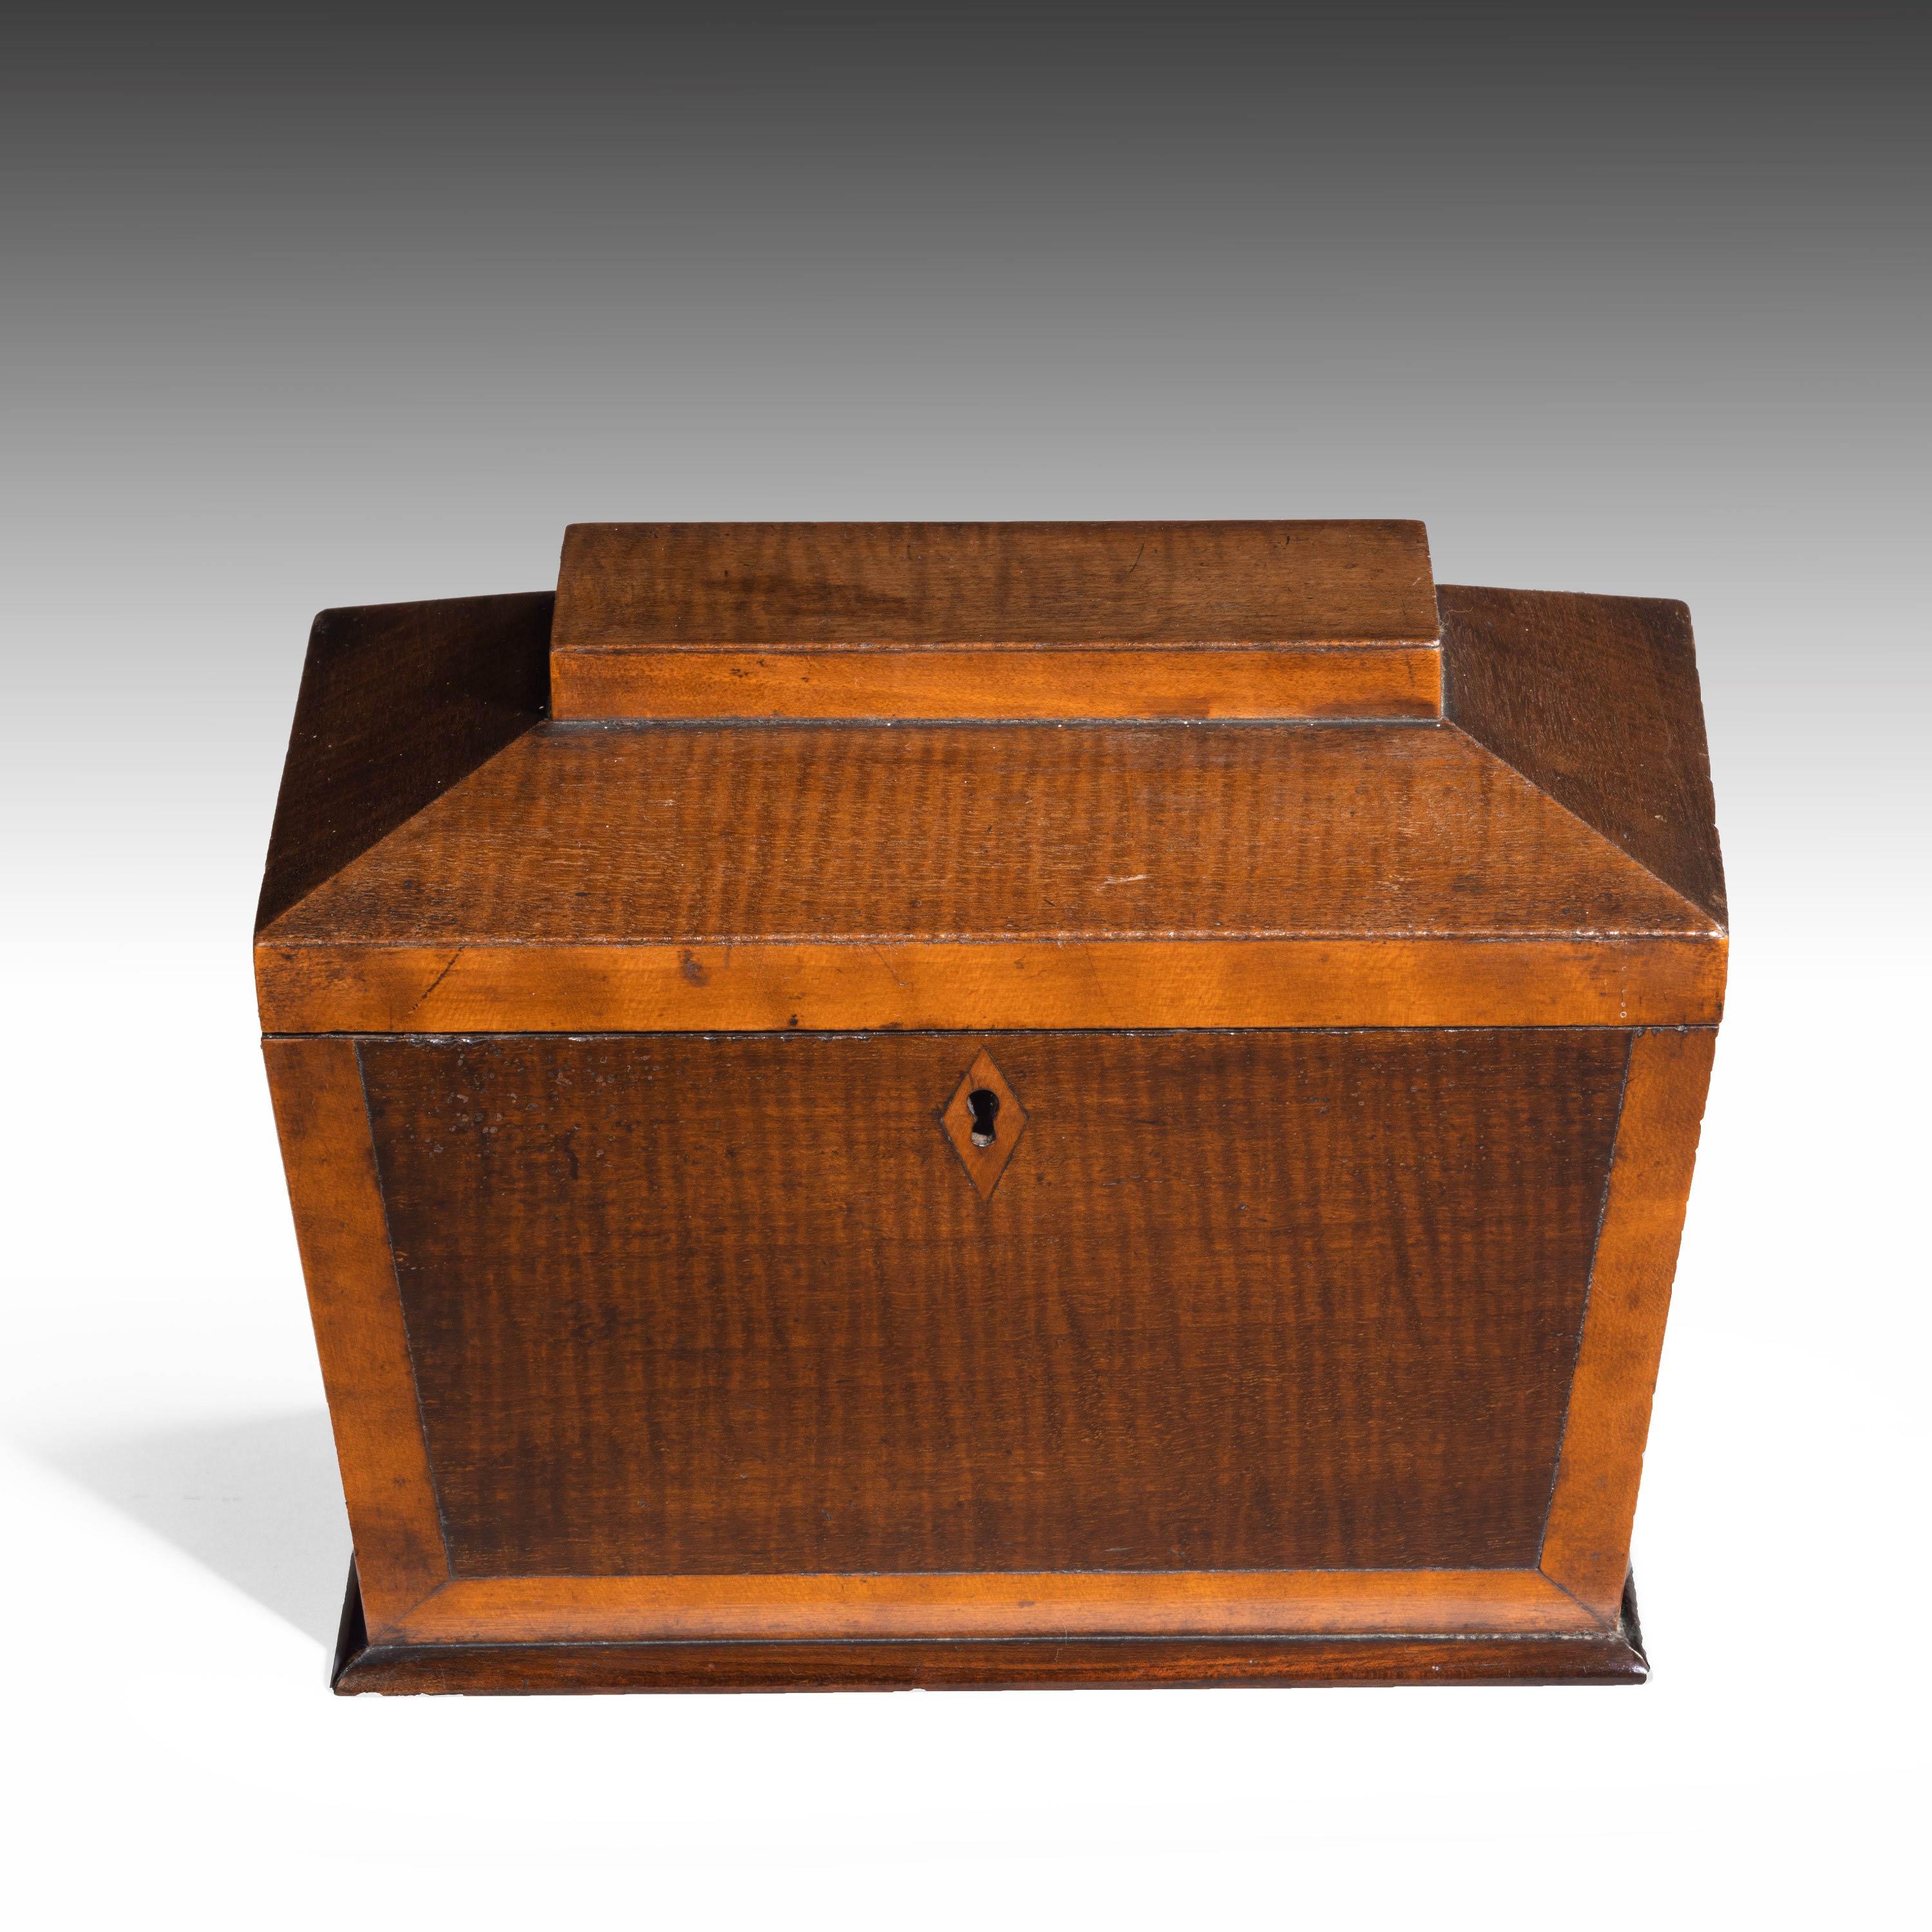 Shaped Late George III Period Mahogany Tea Caddy In Good Condition In Peterborough, Northamptonshire